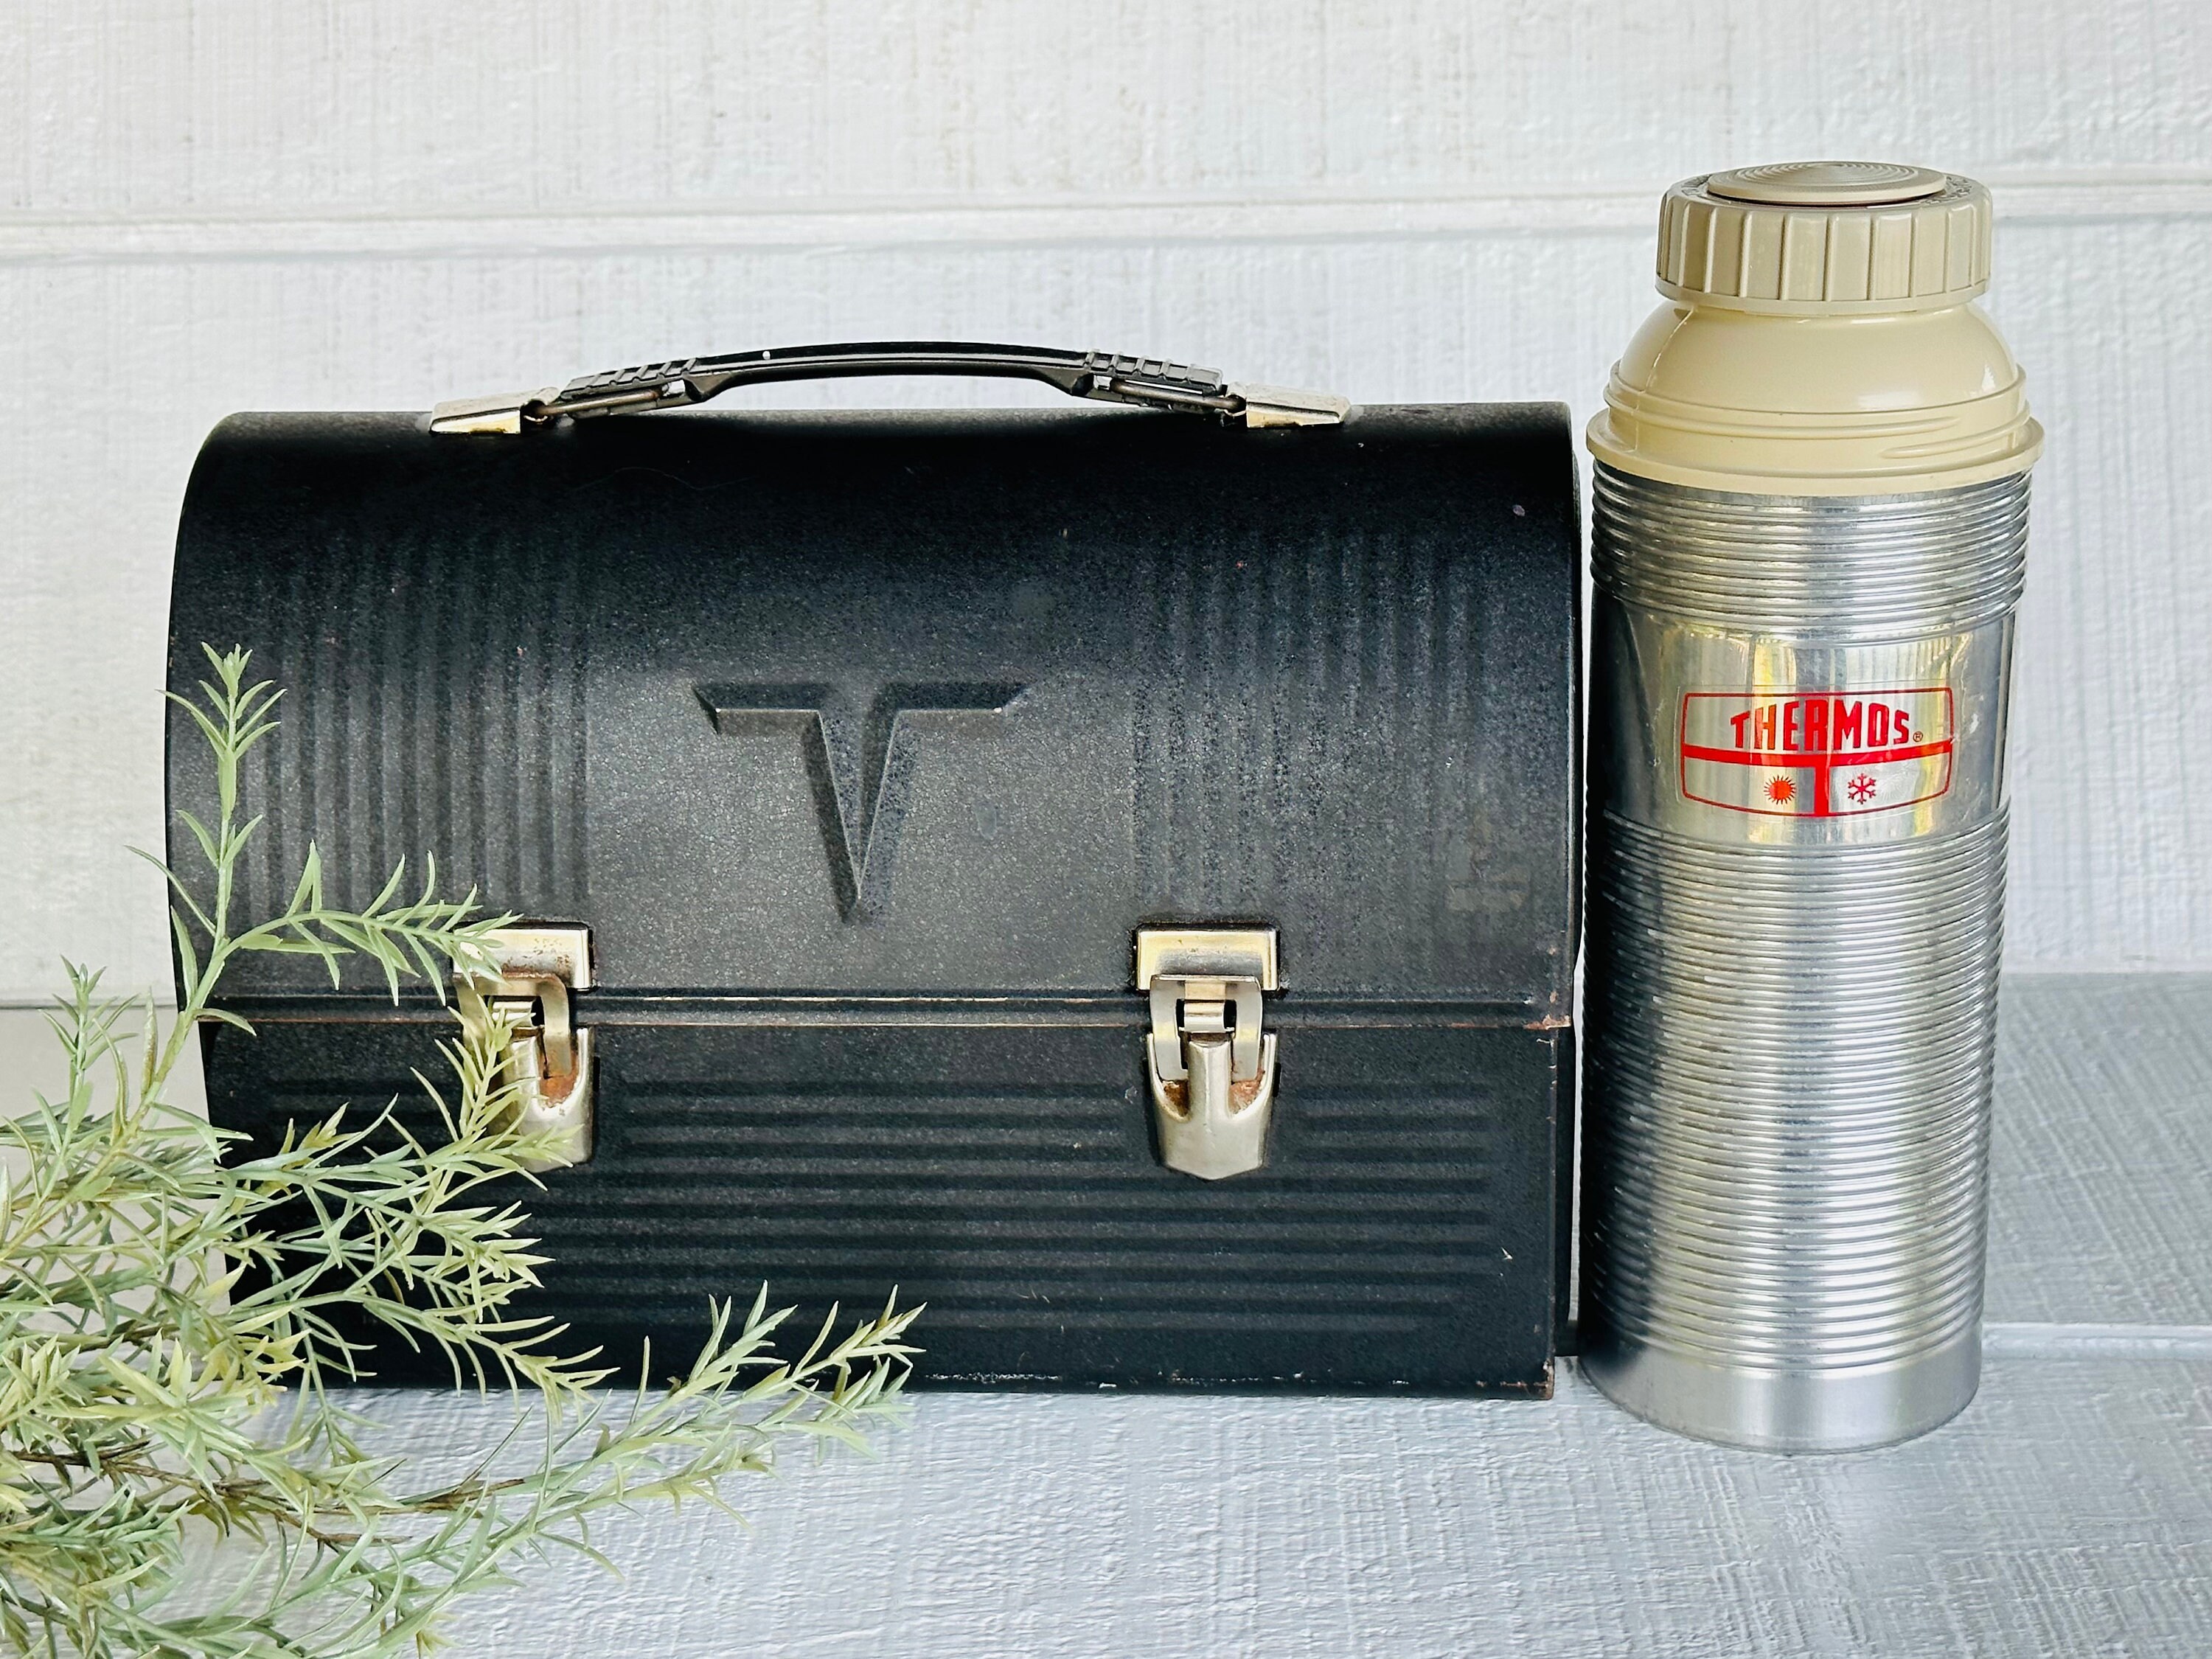 1940's Black Metal Worker Lunch Box - The American Thermos Bottle